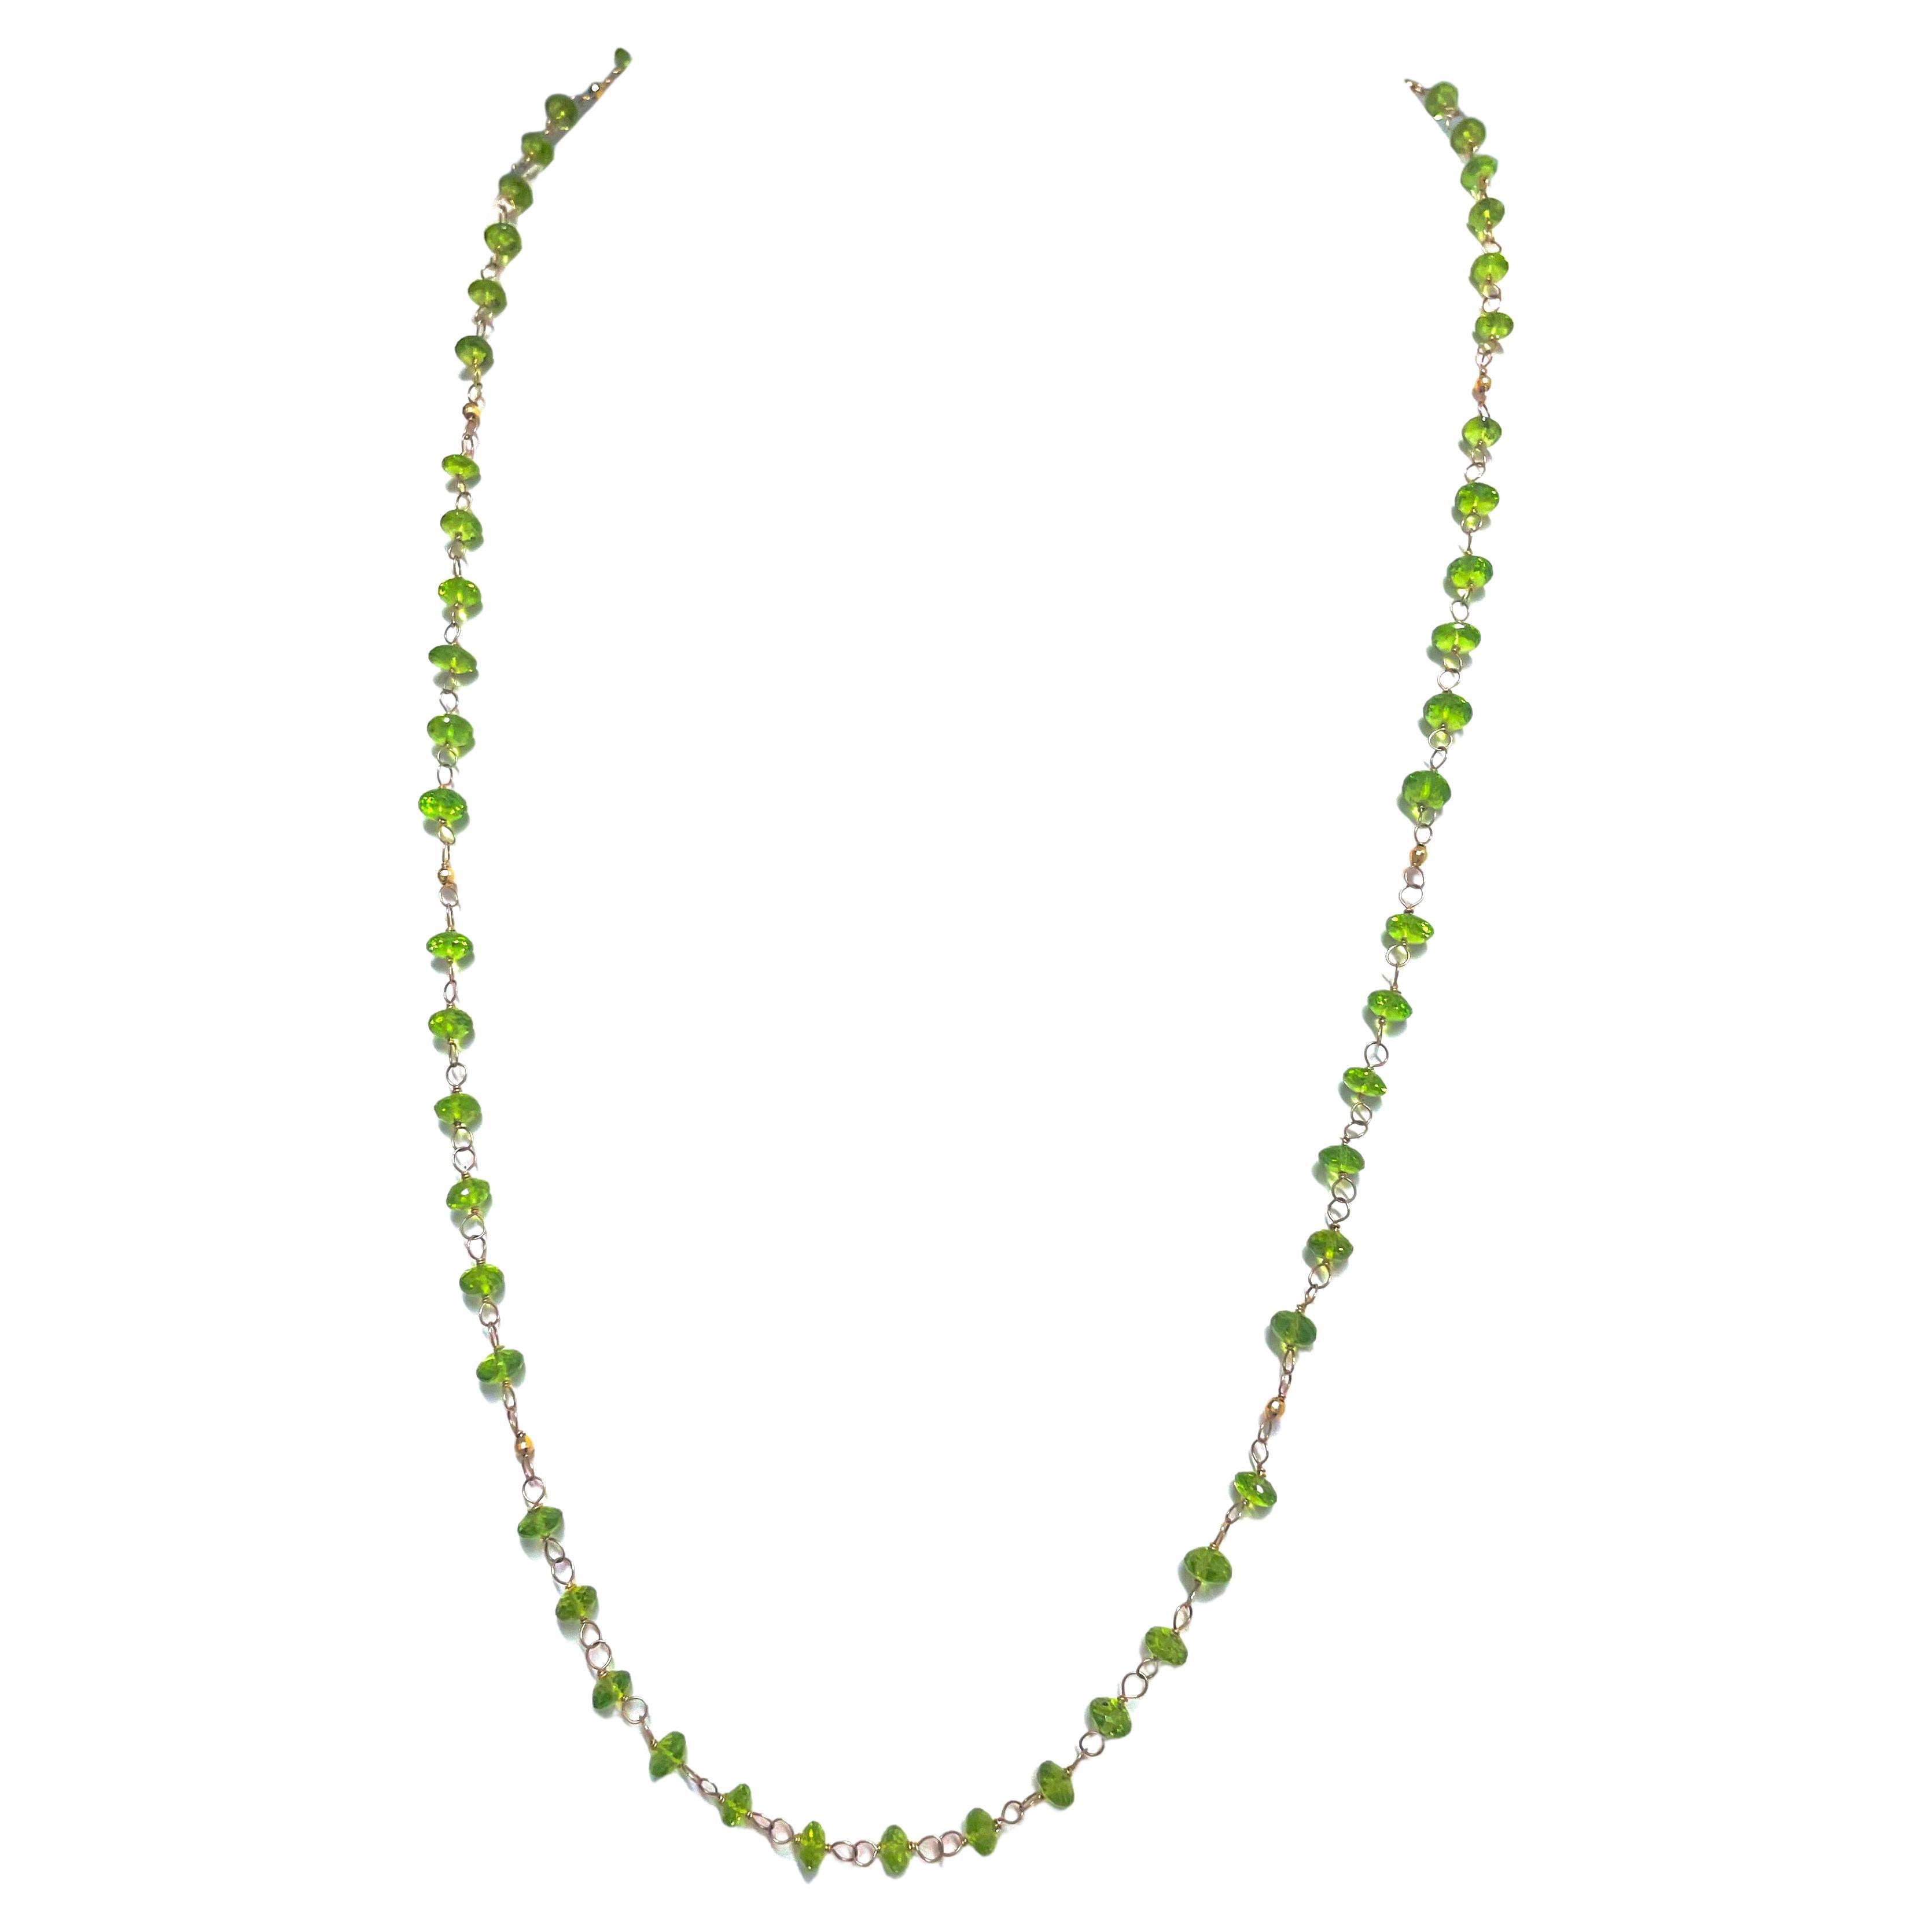 Description
This exquisite and vibrant necklace with its high luster AAA quality Peridot, is delicately hand wire-wrapped creating a graceful and feminine charm to your style. Precious, tiny 14k gold balls are sprinkled throughout to add beauty and